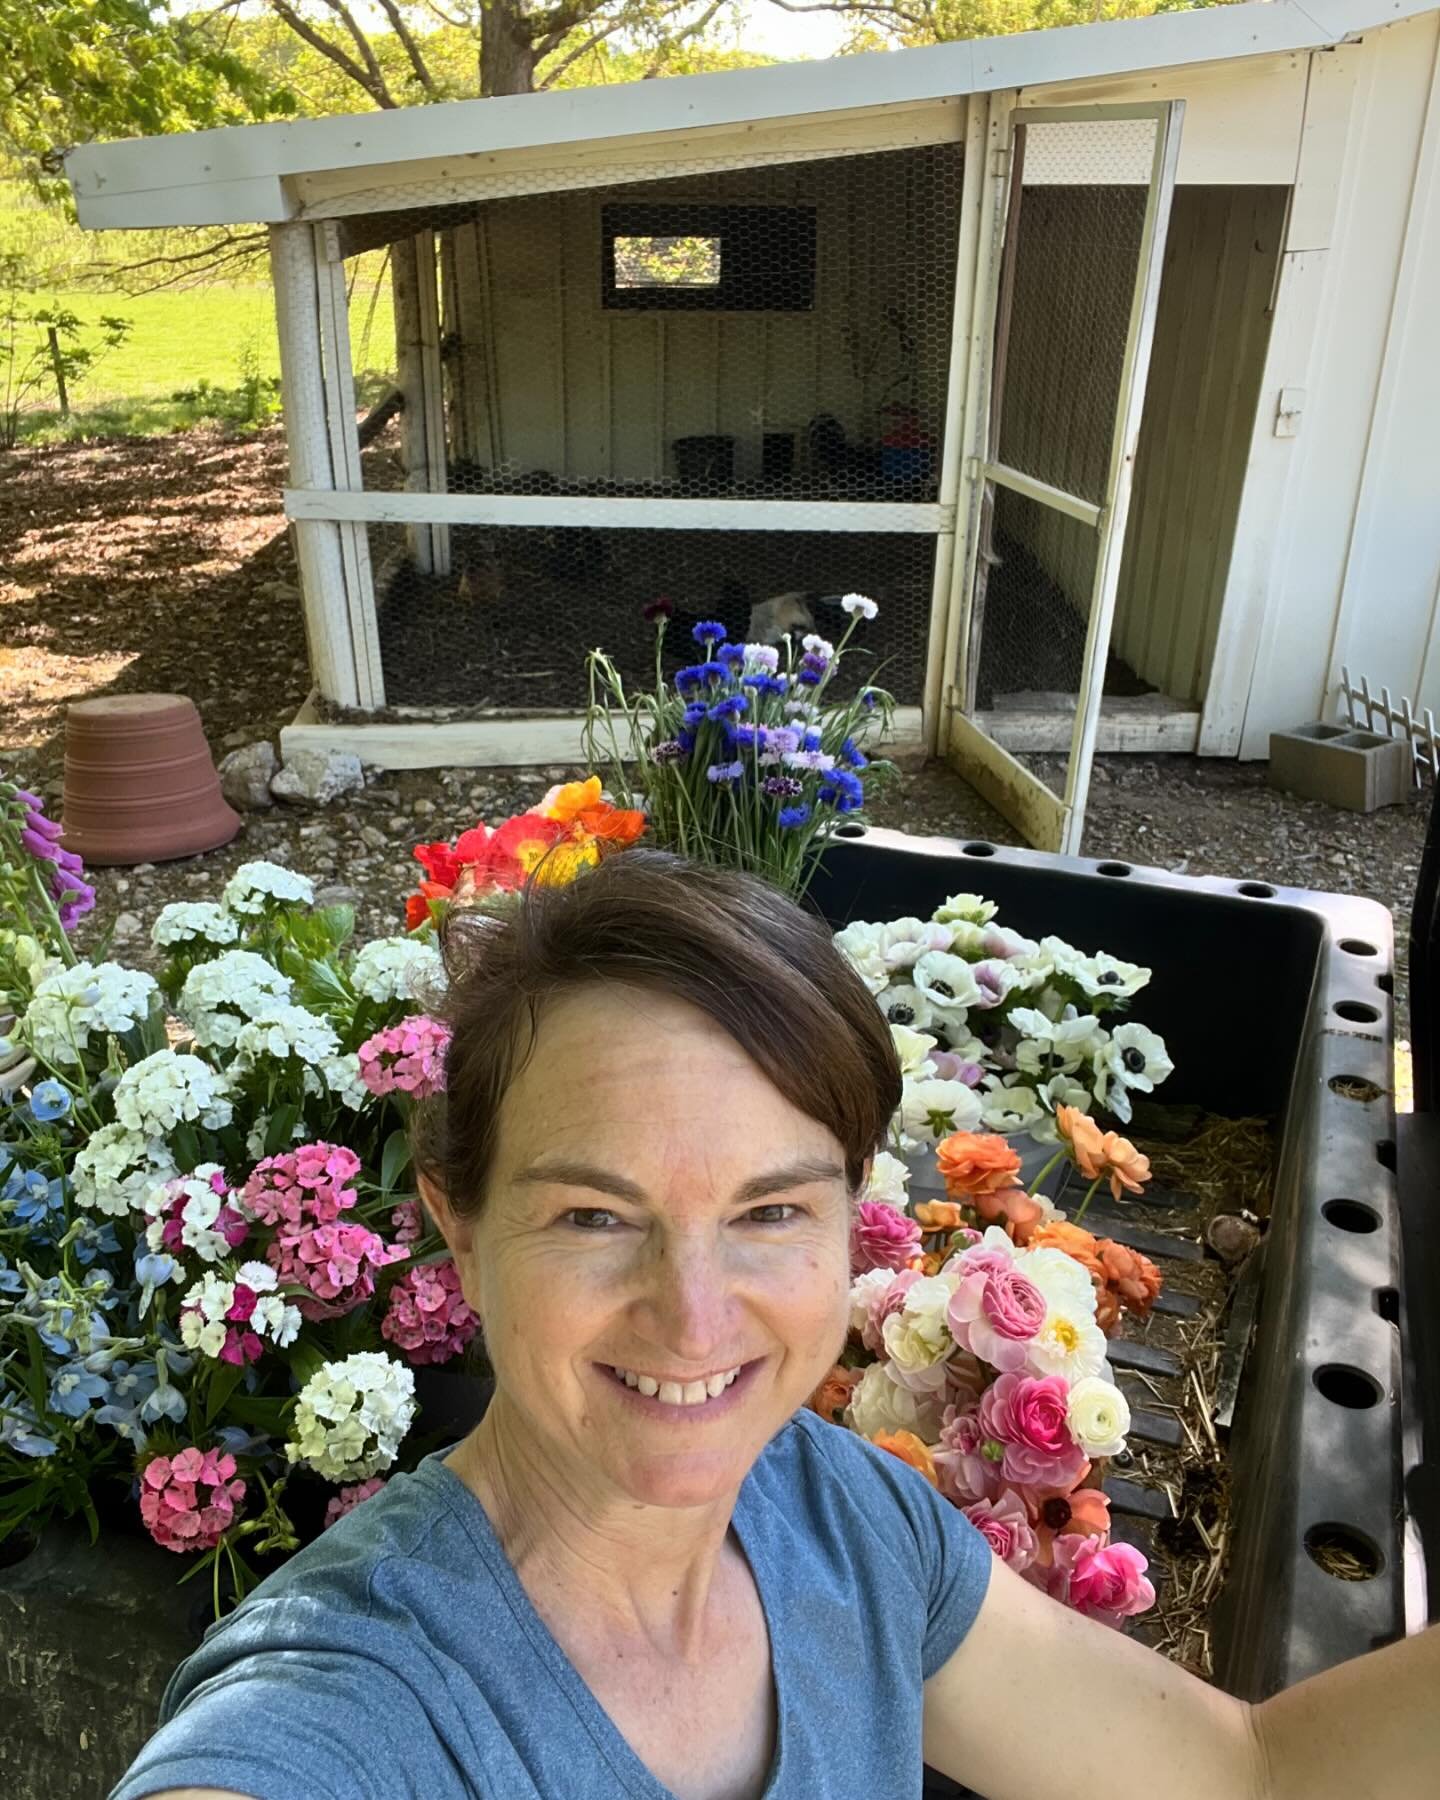 It&rsquo;s been a while since I&rsquo;ve done an introduction post &hellip; Hi, I&rsquo;m Jennifer, your local flower source in Pittsboro and SW Wake County. I like cilantro, crystallized ginger and stovetop popcorn. And dark chocolate.

Flowers grad